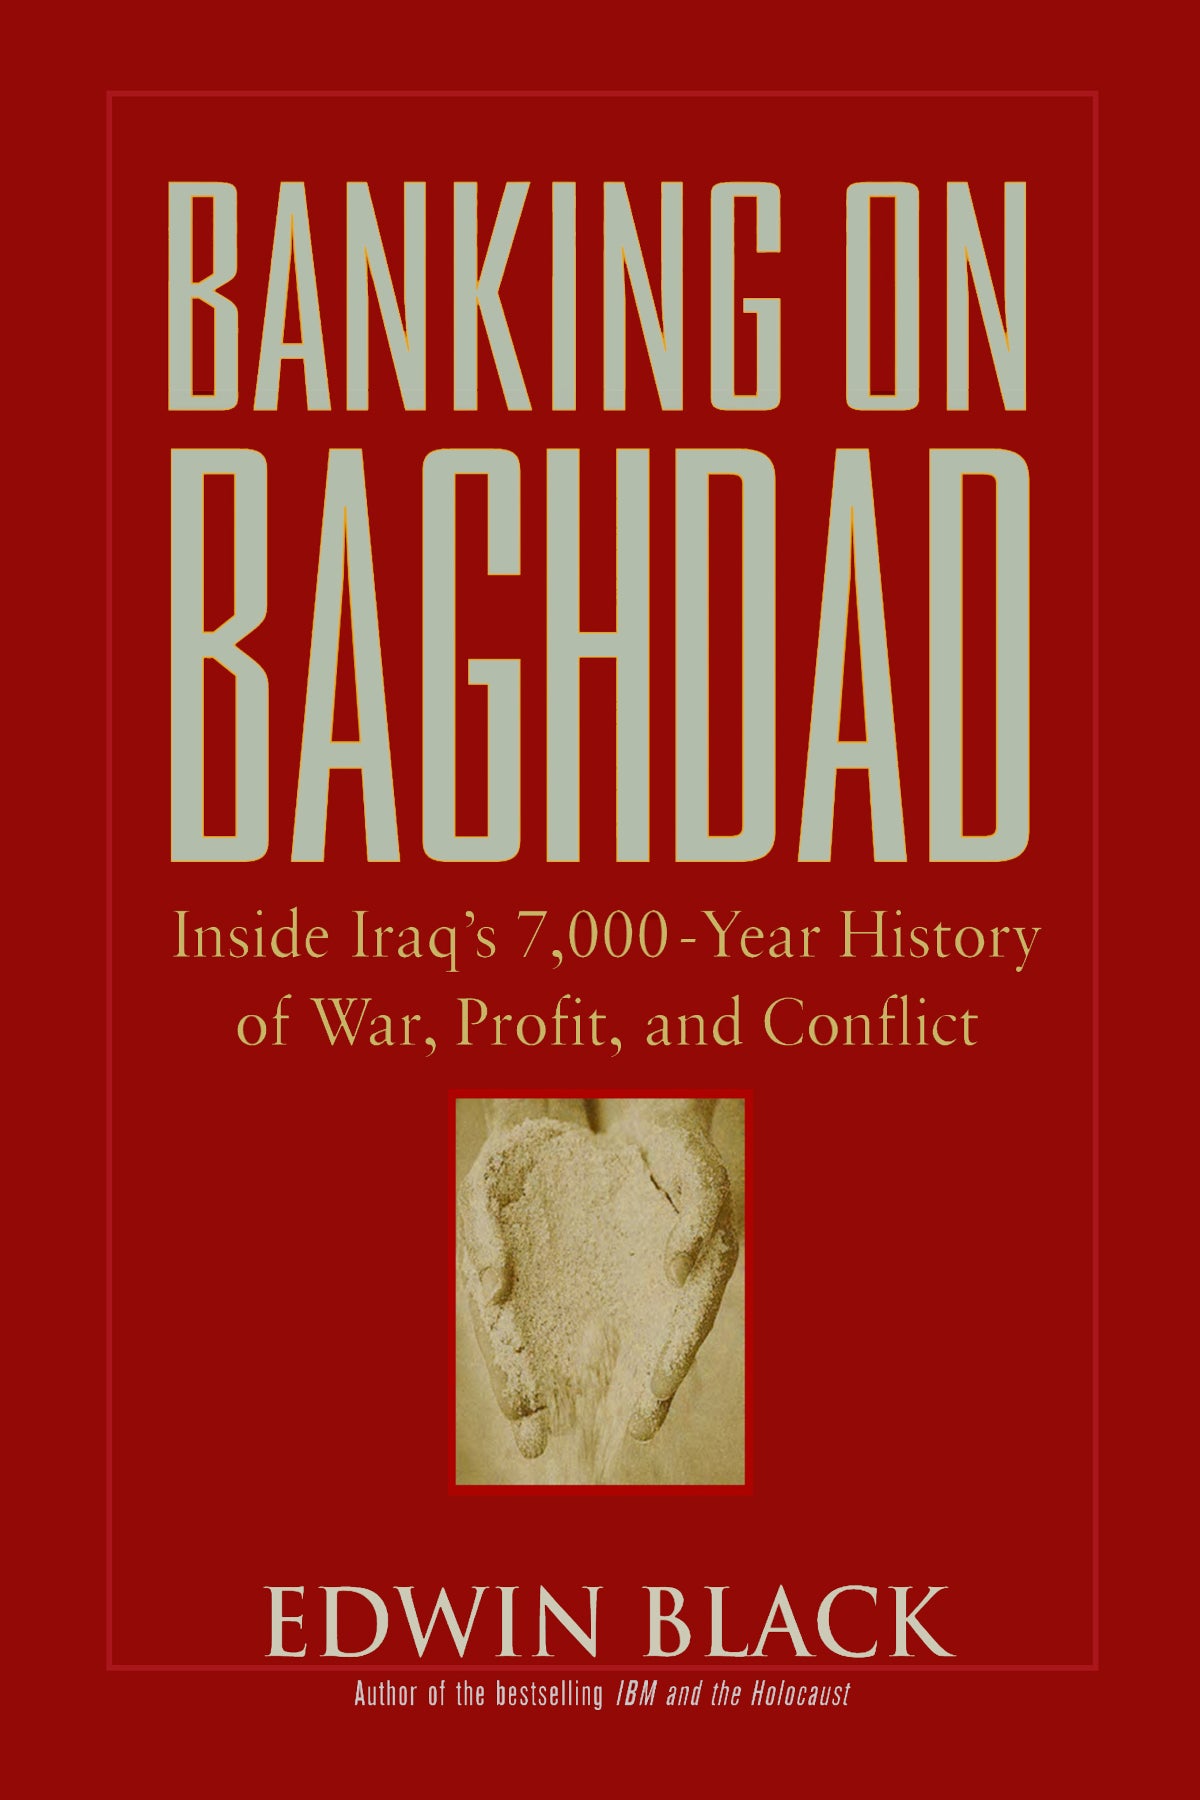 Banking on Baghdad: Inside Iraq's 7,000-year History of War, Profit, and Conflict